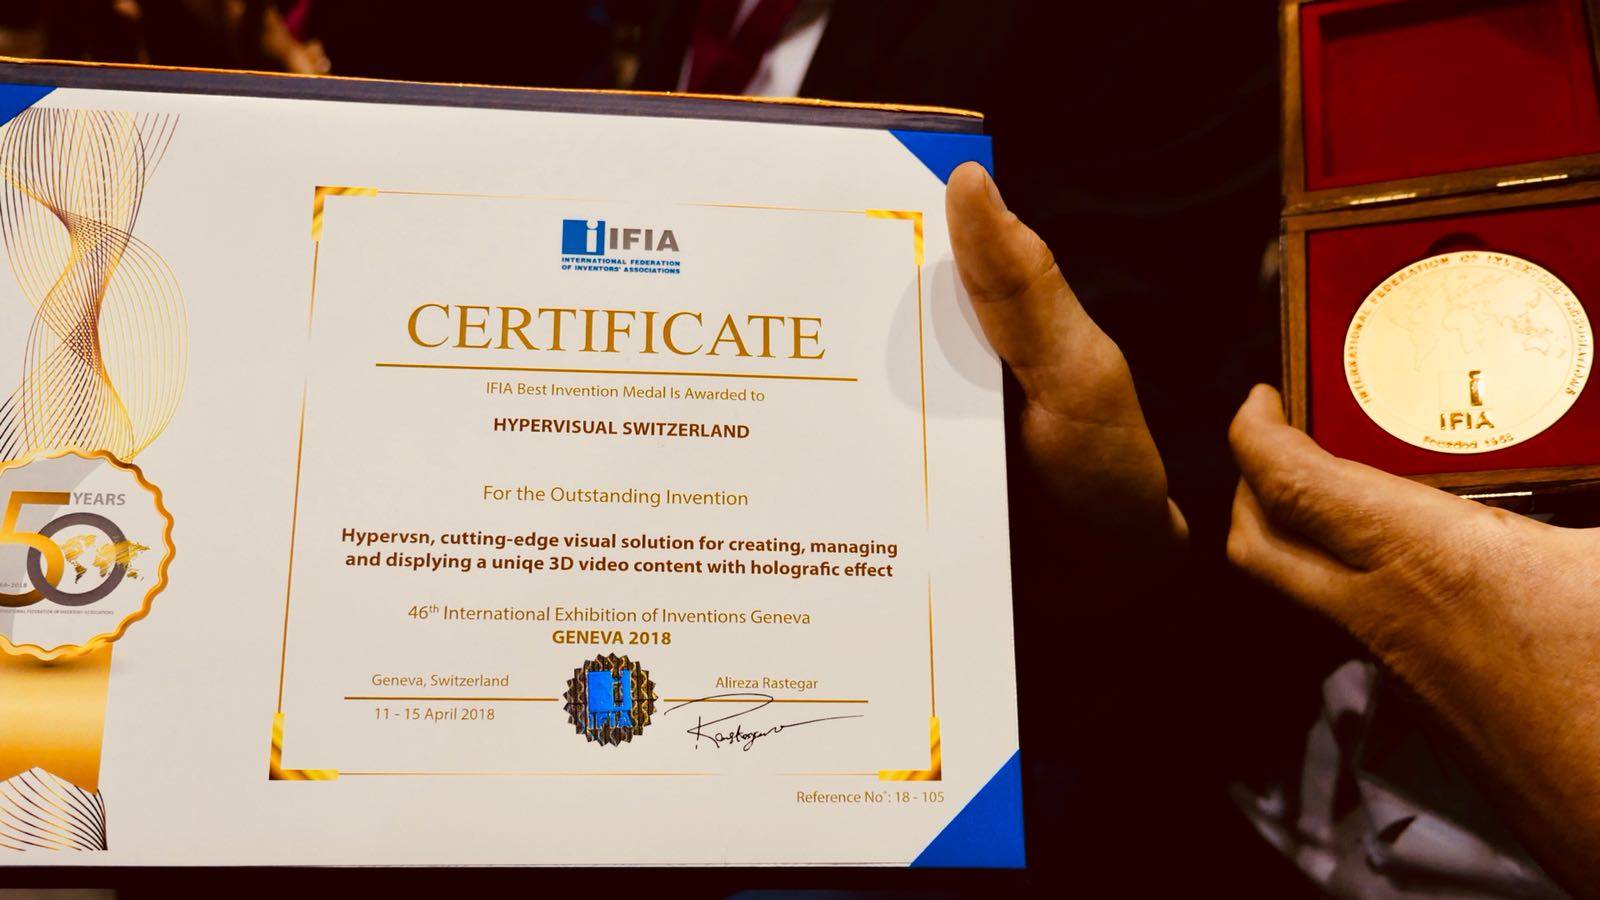 IFIA best invention Medal is awarded to HYPERVISUAL